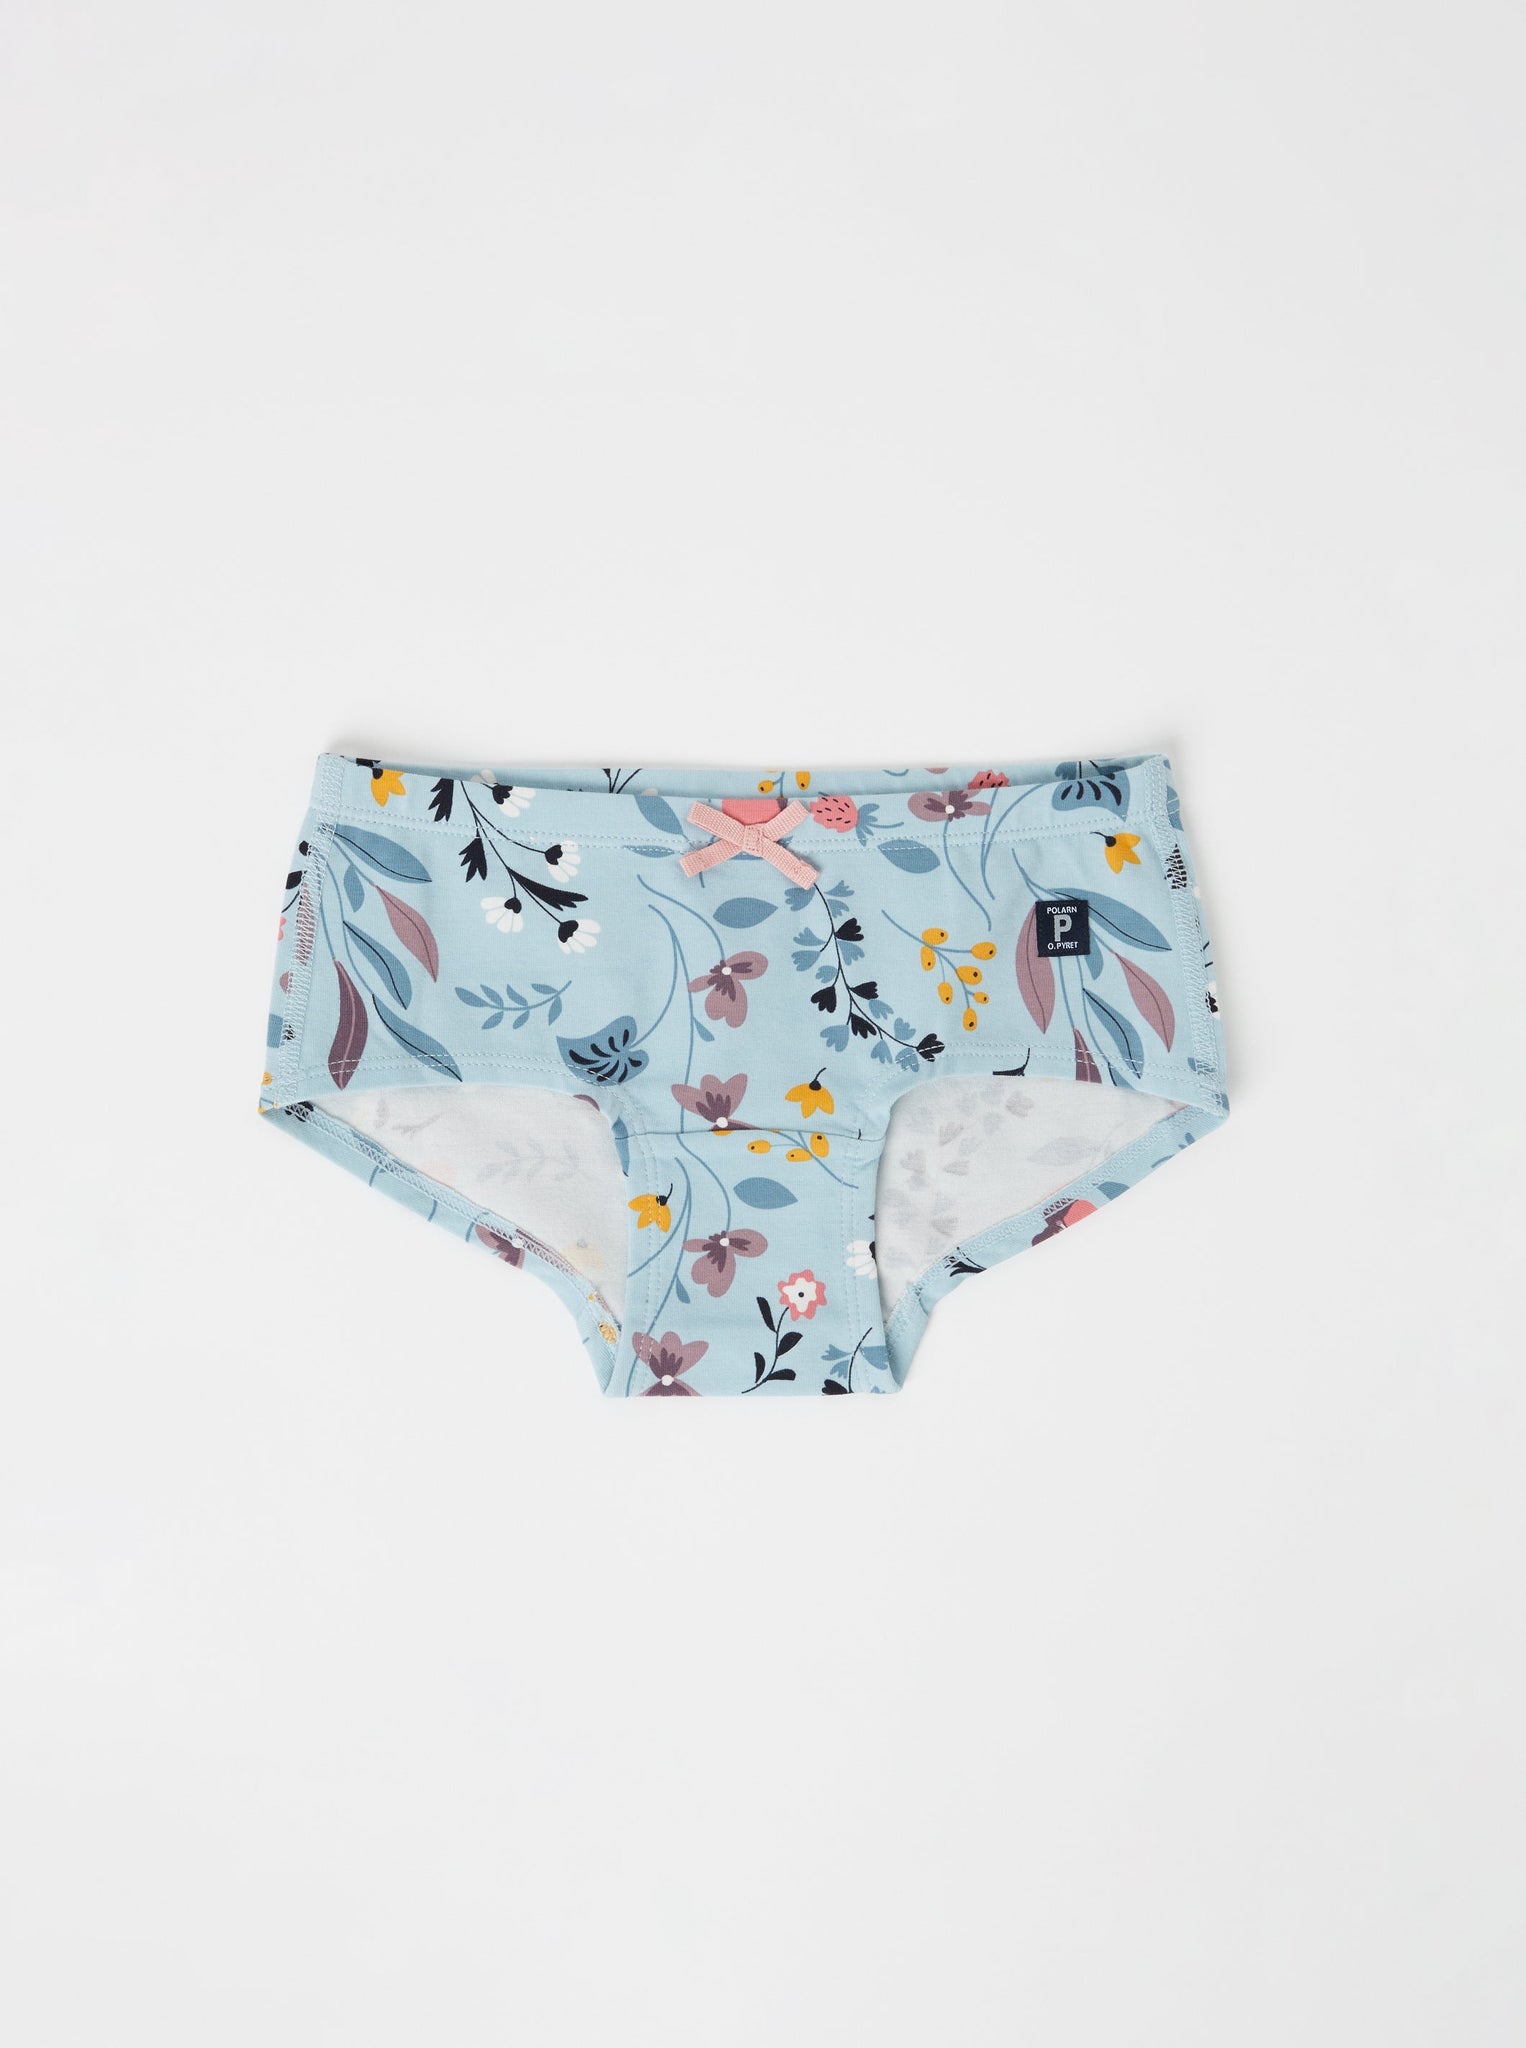 Cotton Blue Girls Hipster Briefs from the Polarn O. Pyret kidswear collection. Clothes made using sustainably sourced materials.